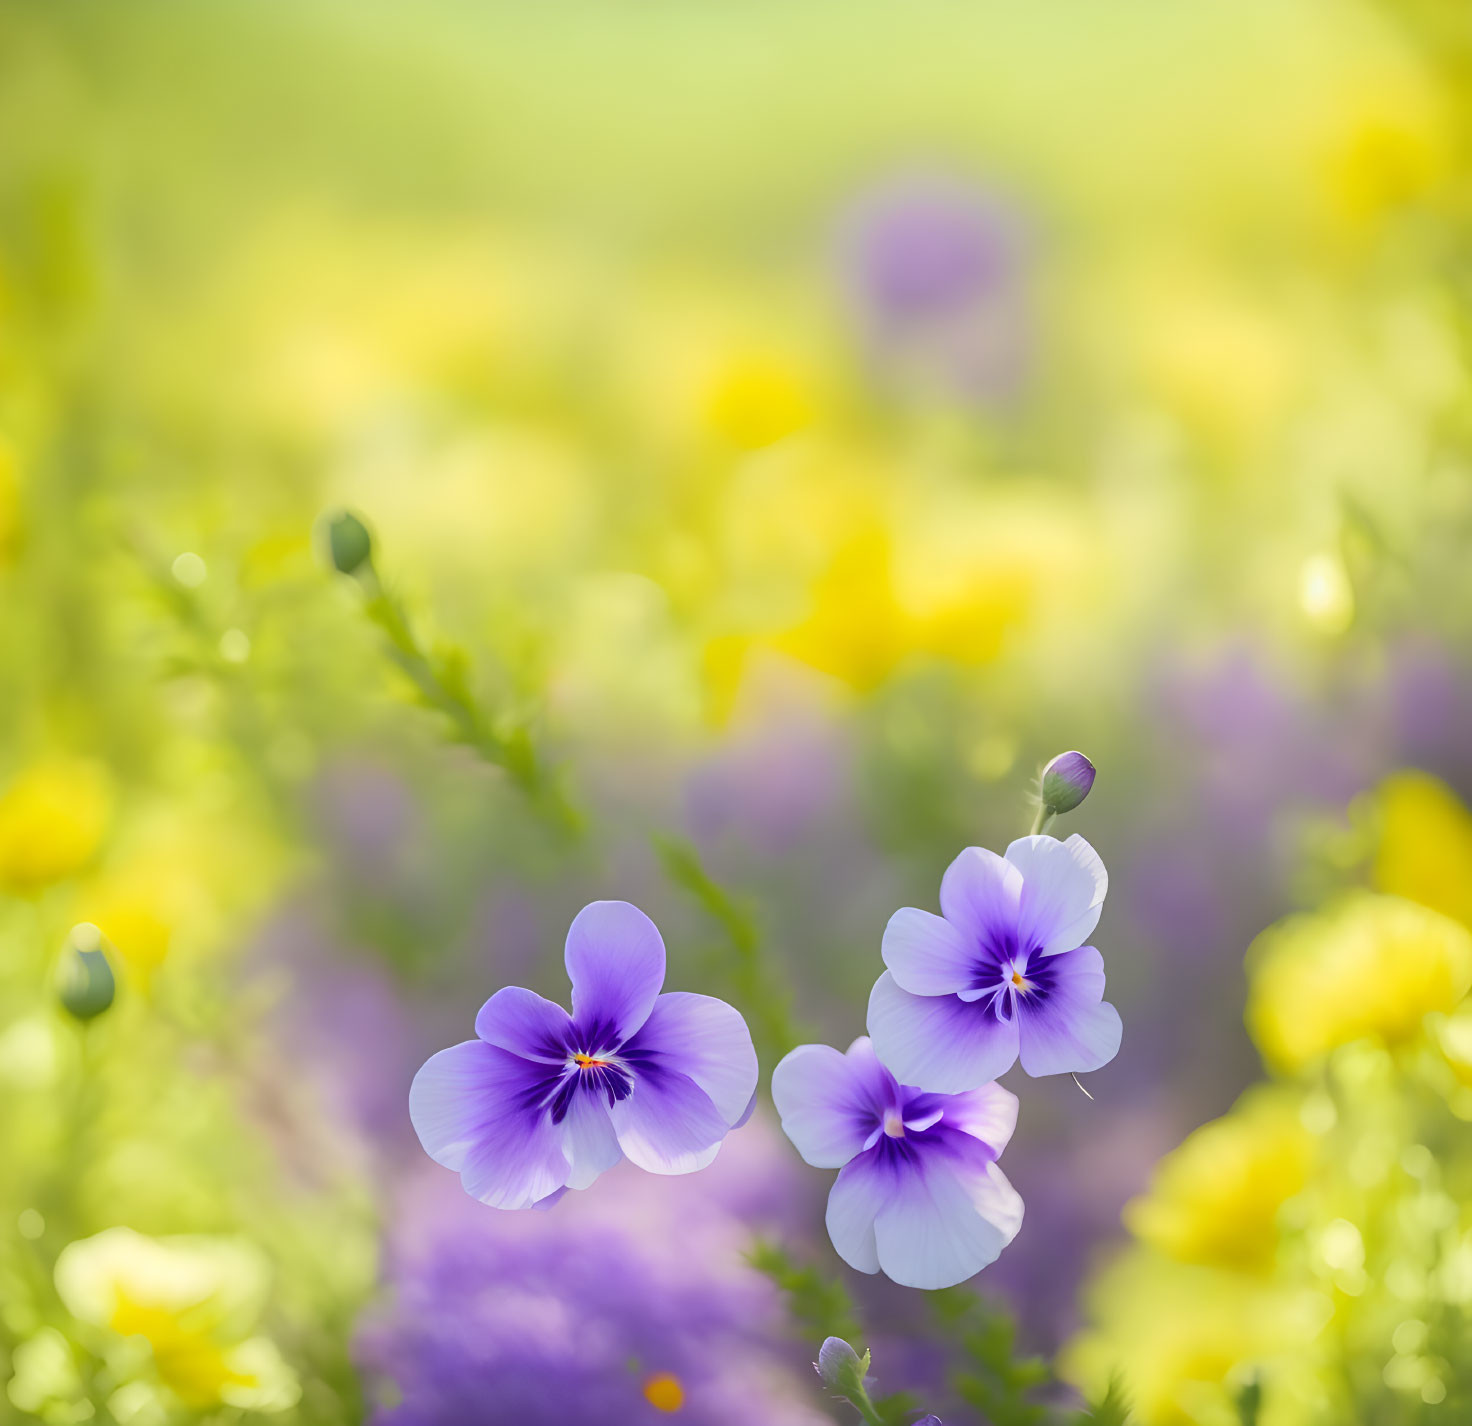 Purple and Yellow Flowers in Soft Sunlight